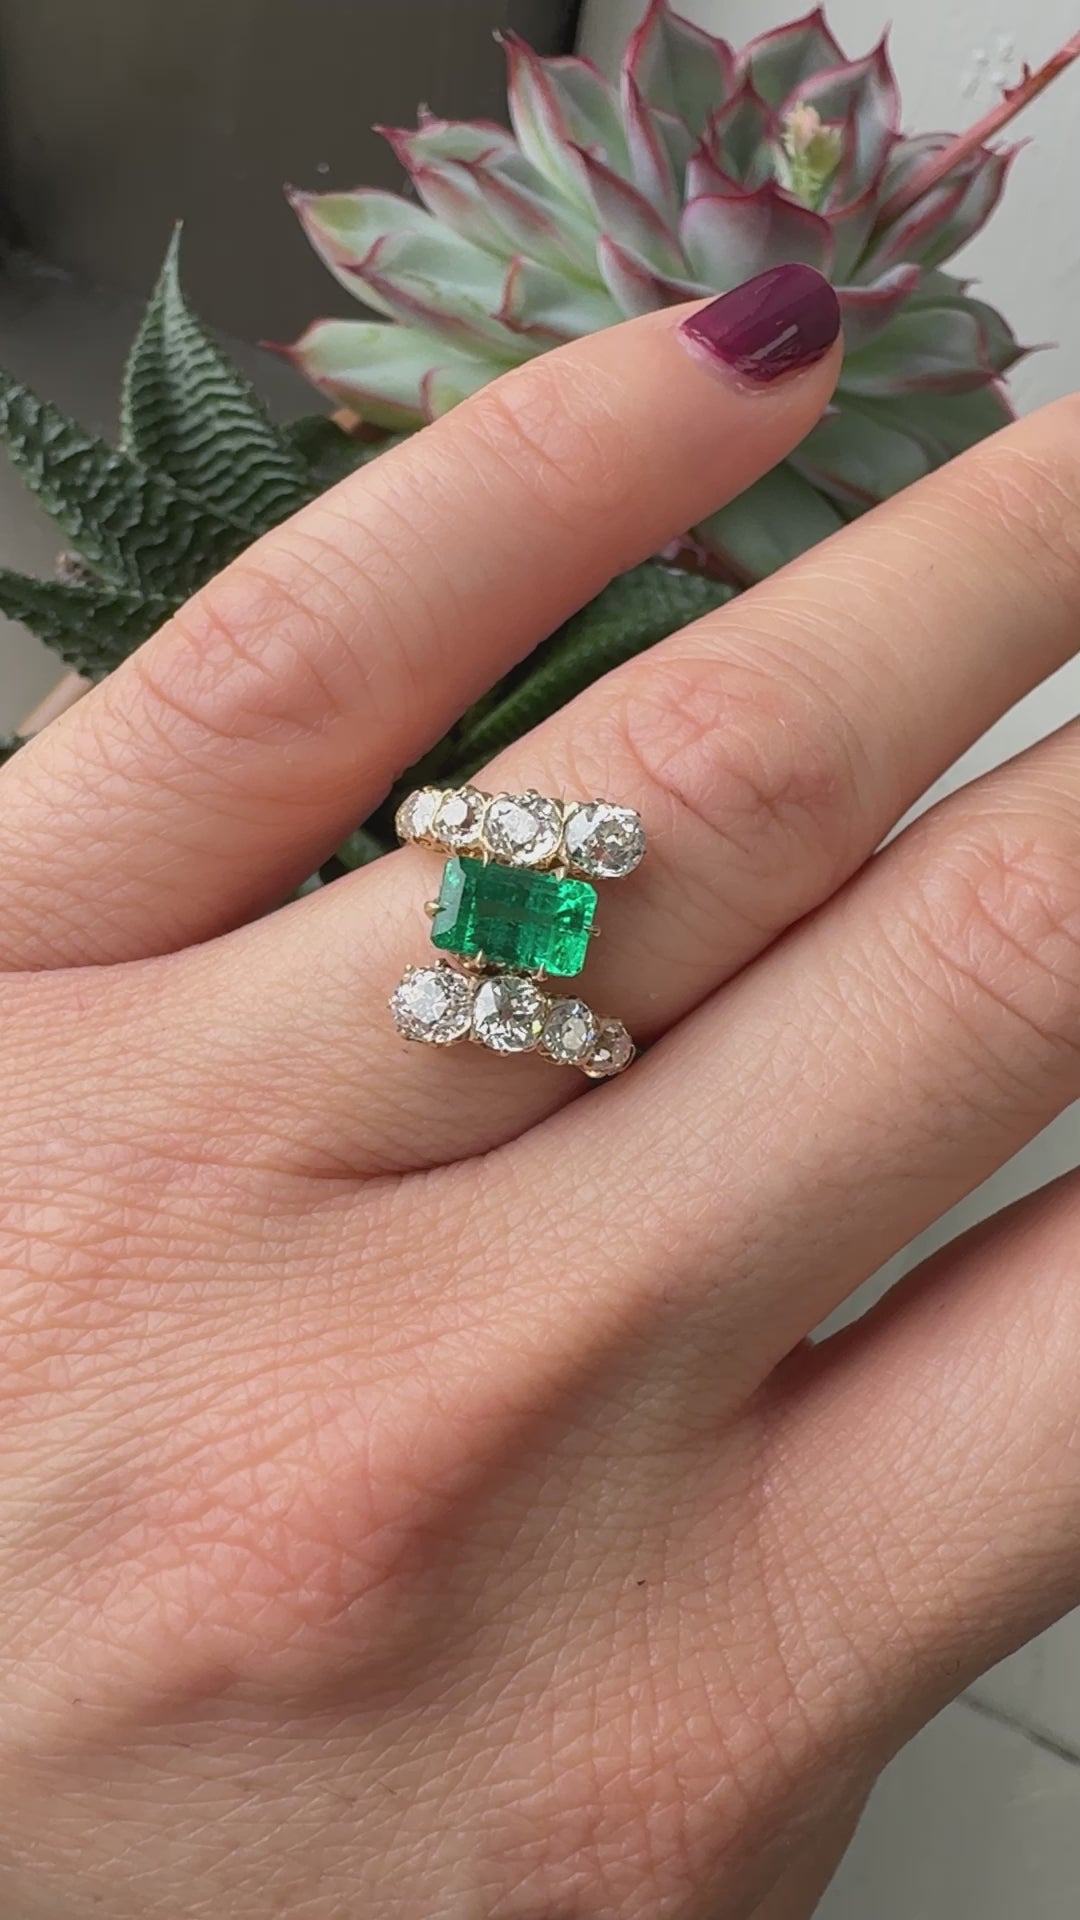 Antique Victorian 18K Rose Gold Old Mine Diamond Emerald Engagement Ring - GIA